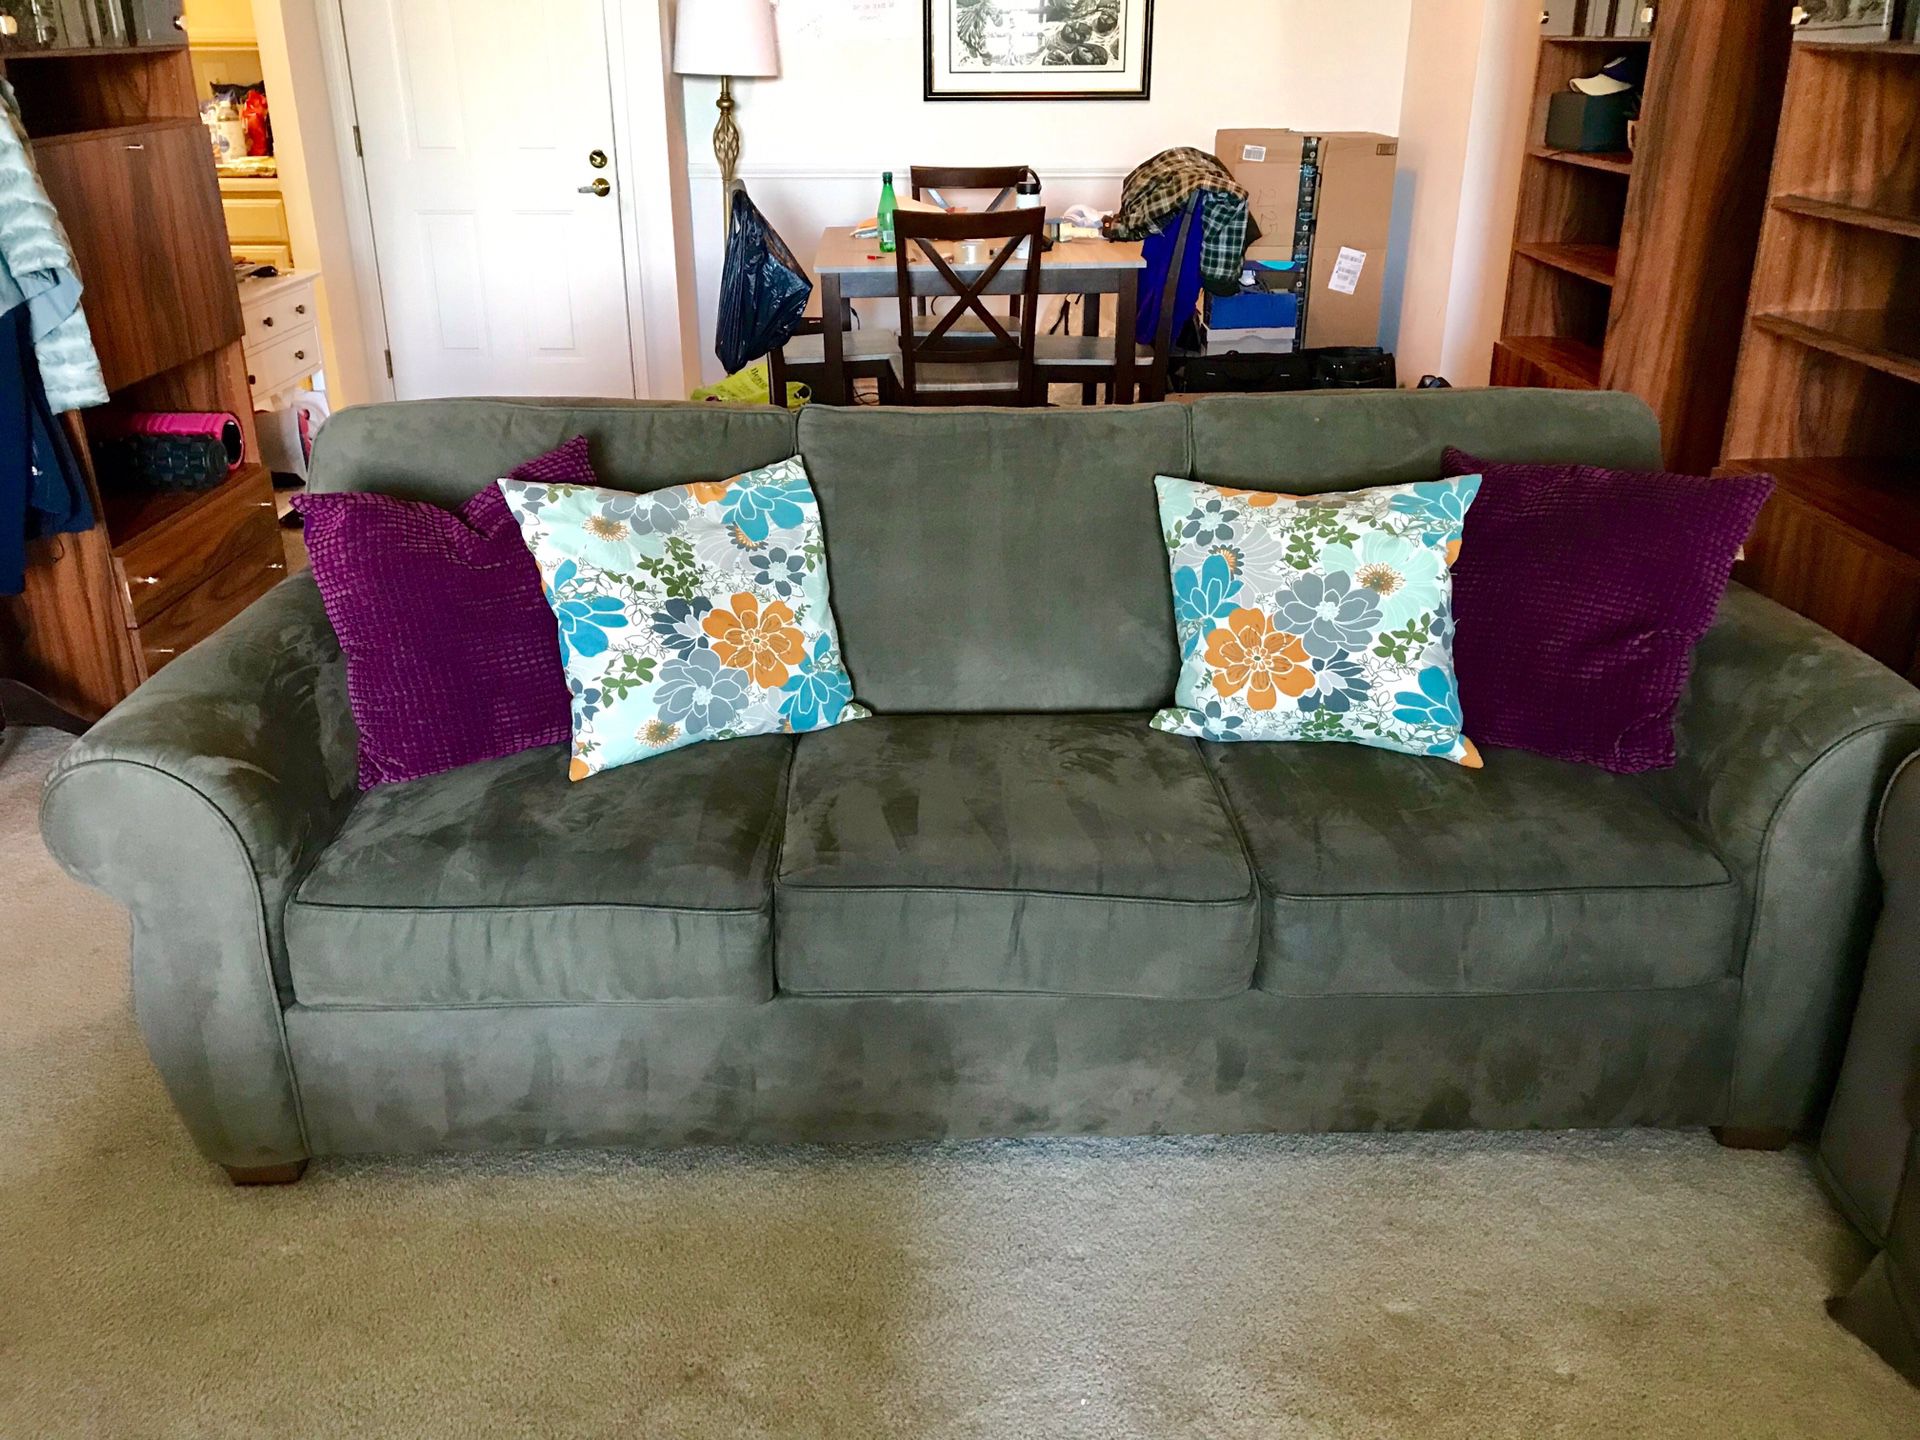 Great couch - Make me an offer!